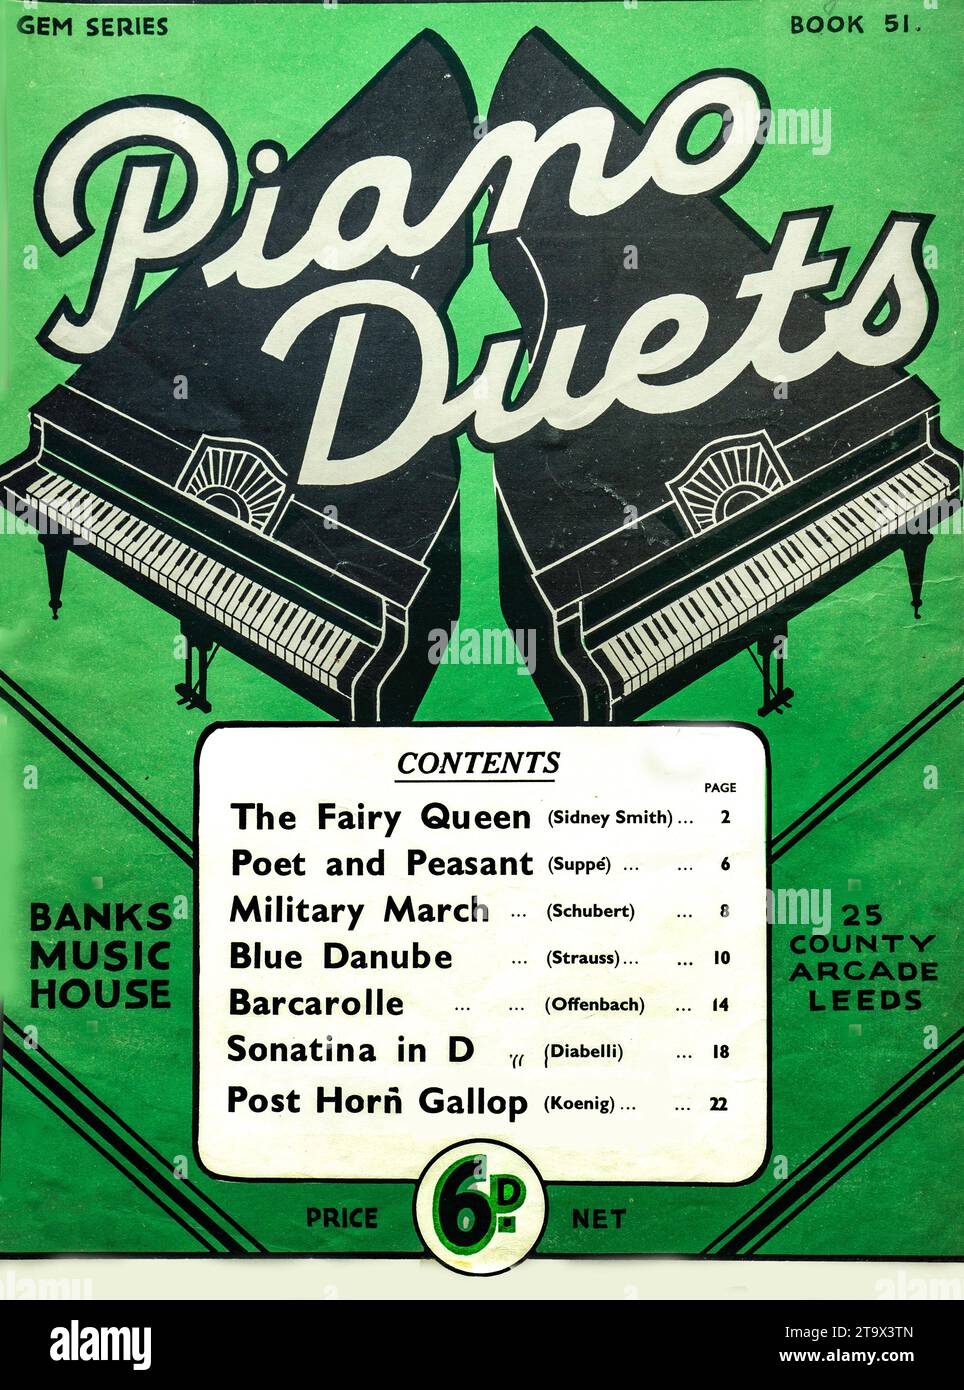 Vintage sheet music book cover for piano duets, featuring classic compositions. image only. Stock Photo